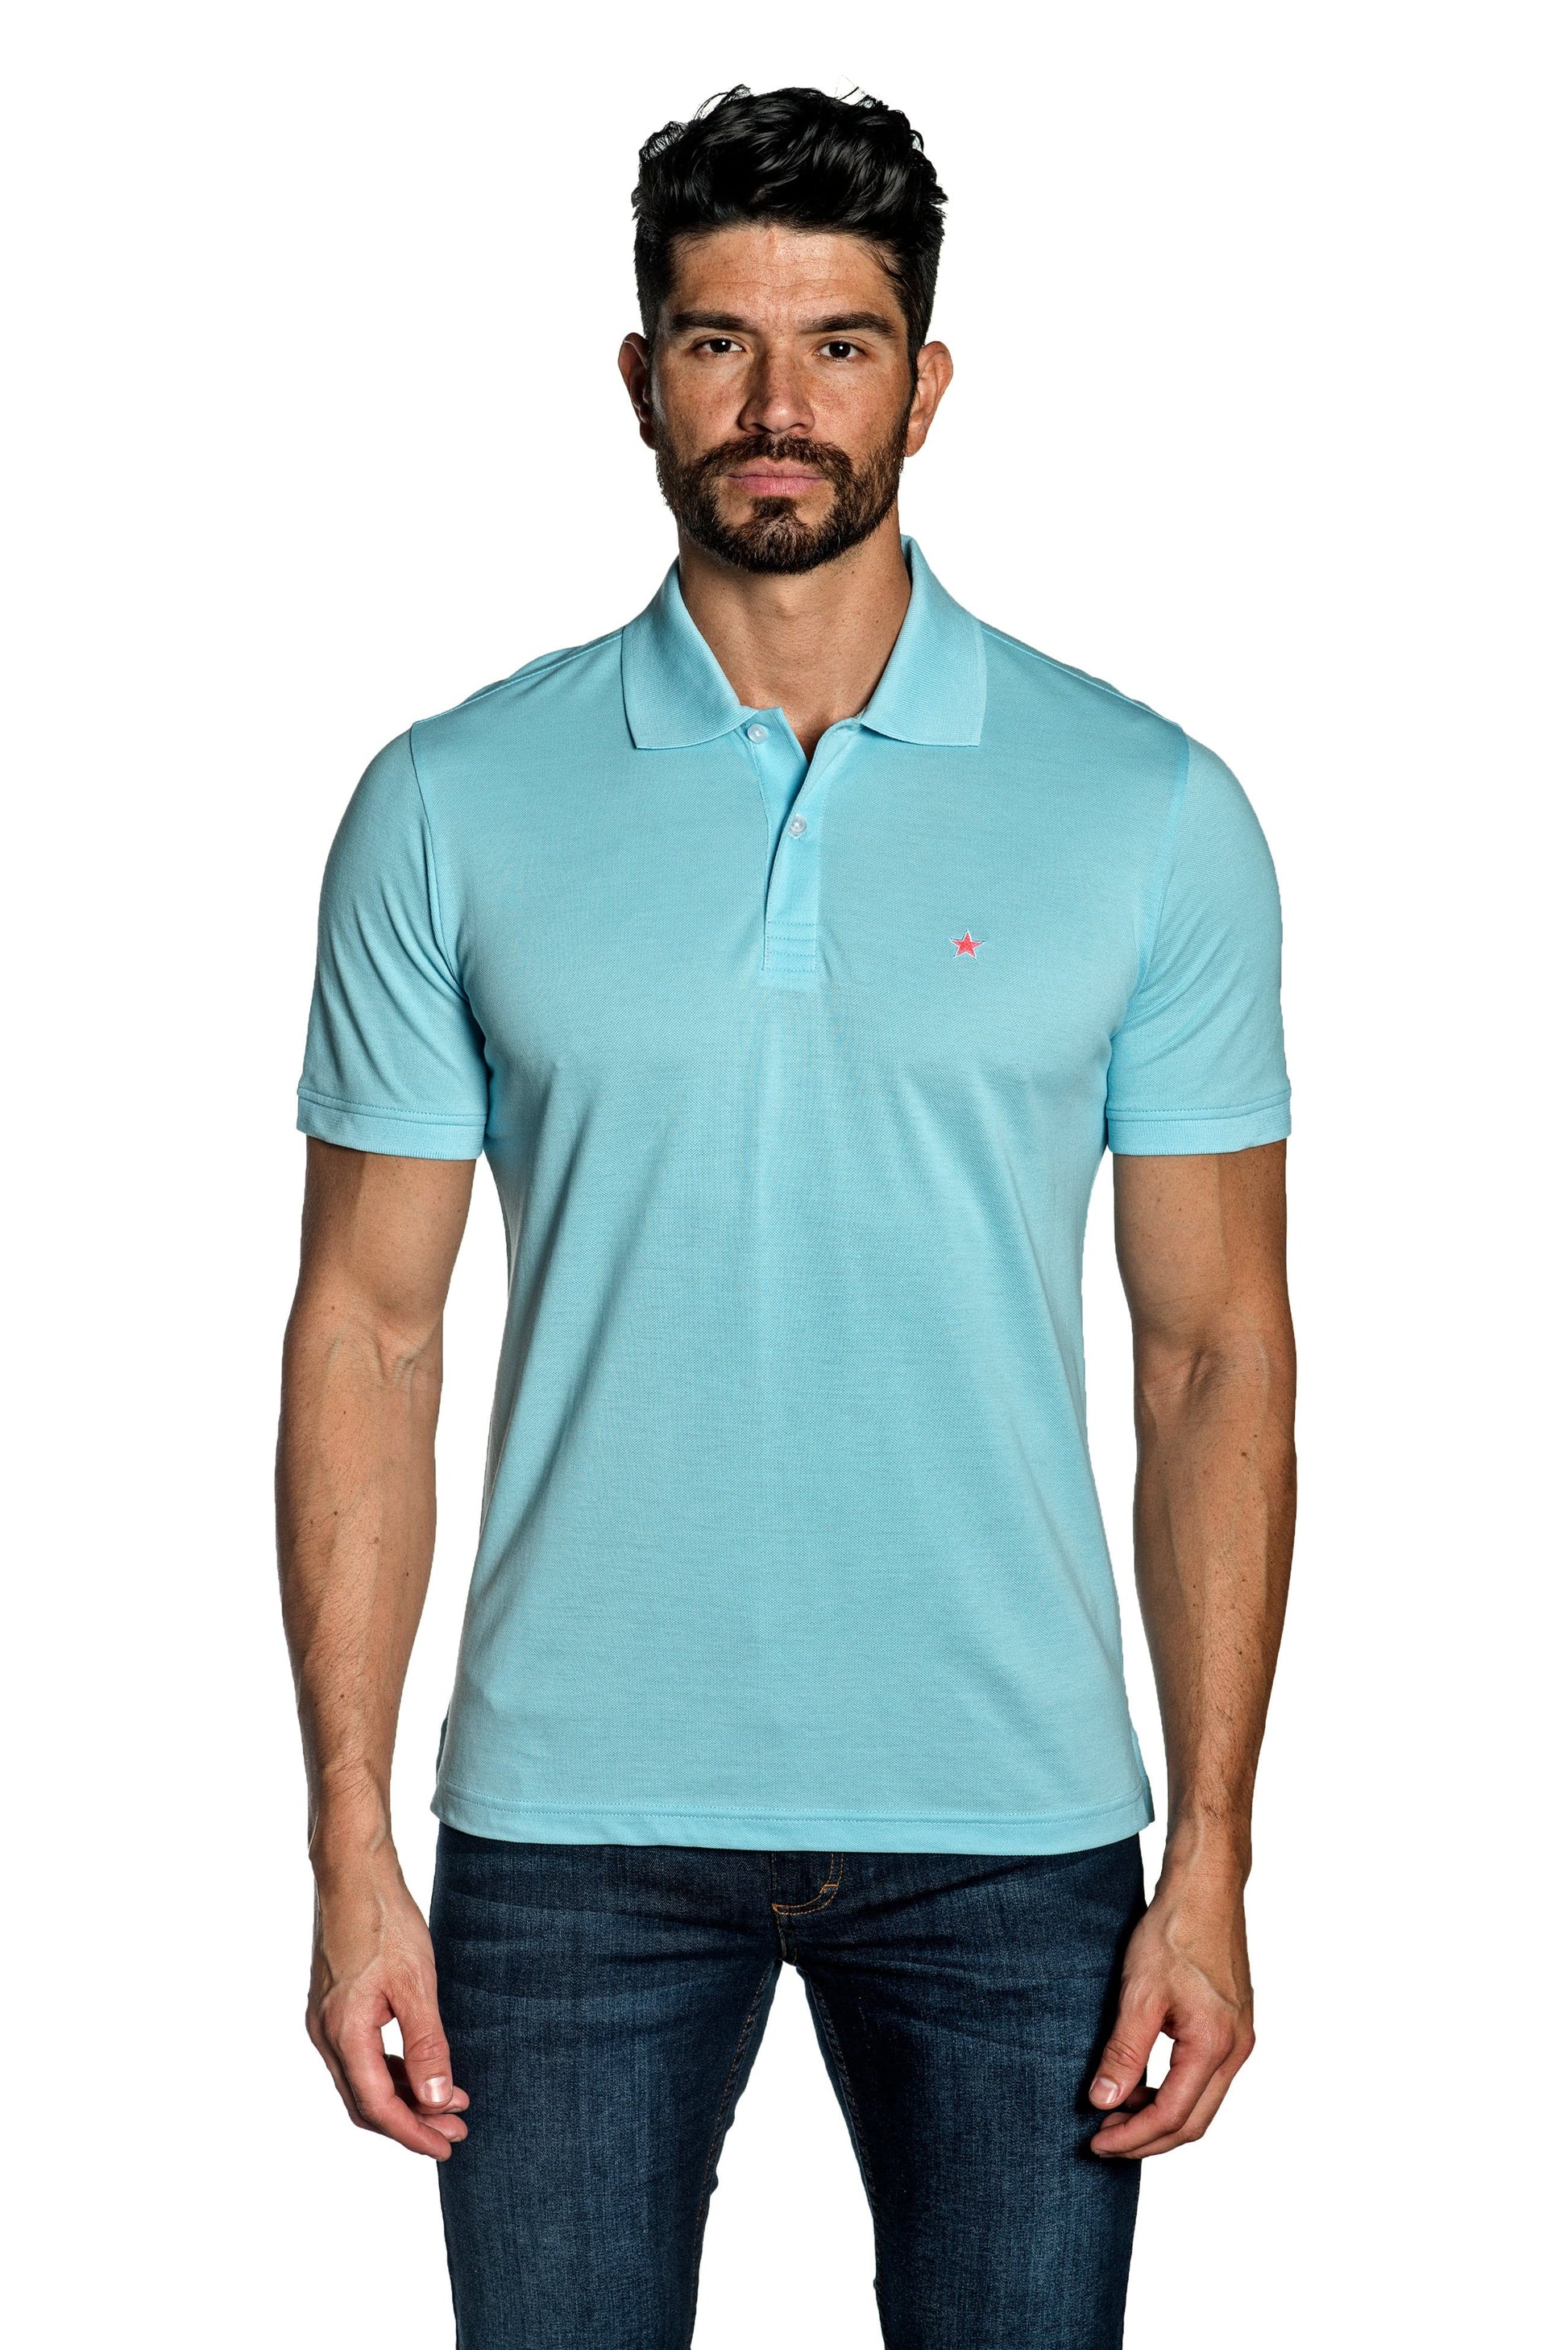 Light Blue Mens Polo With Star Embroidery P-25.